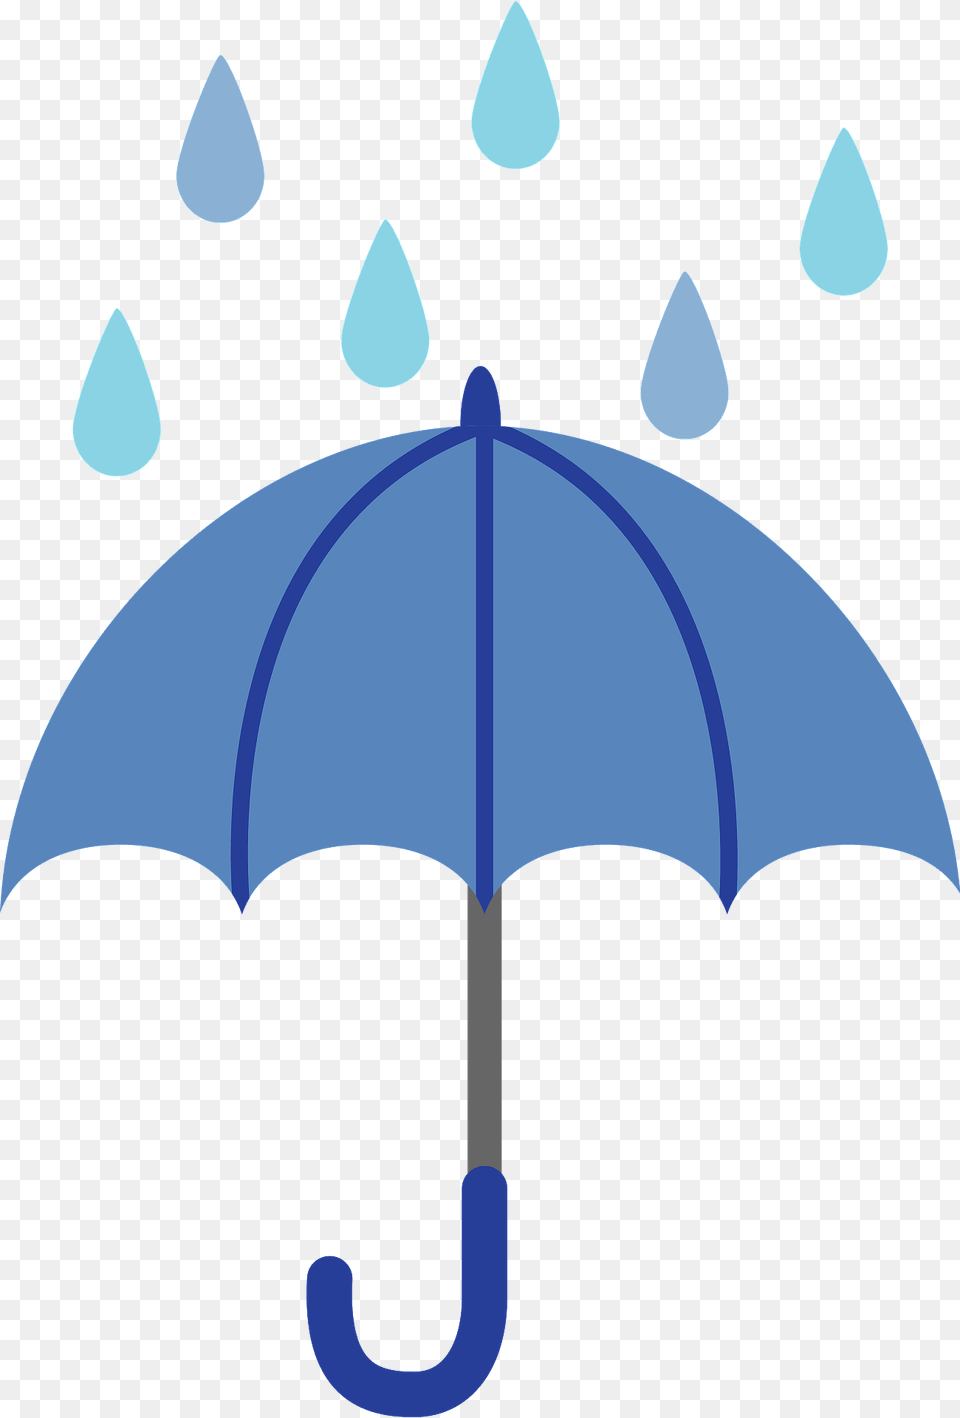 Umbrella In The Rain Clipart, Canopy Png Image